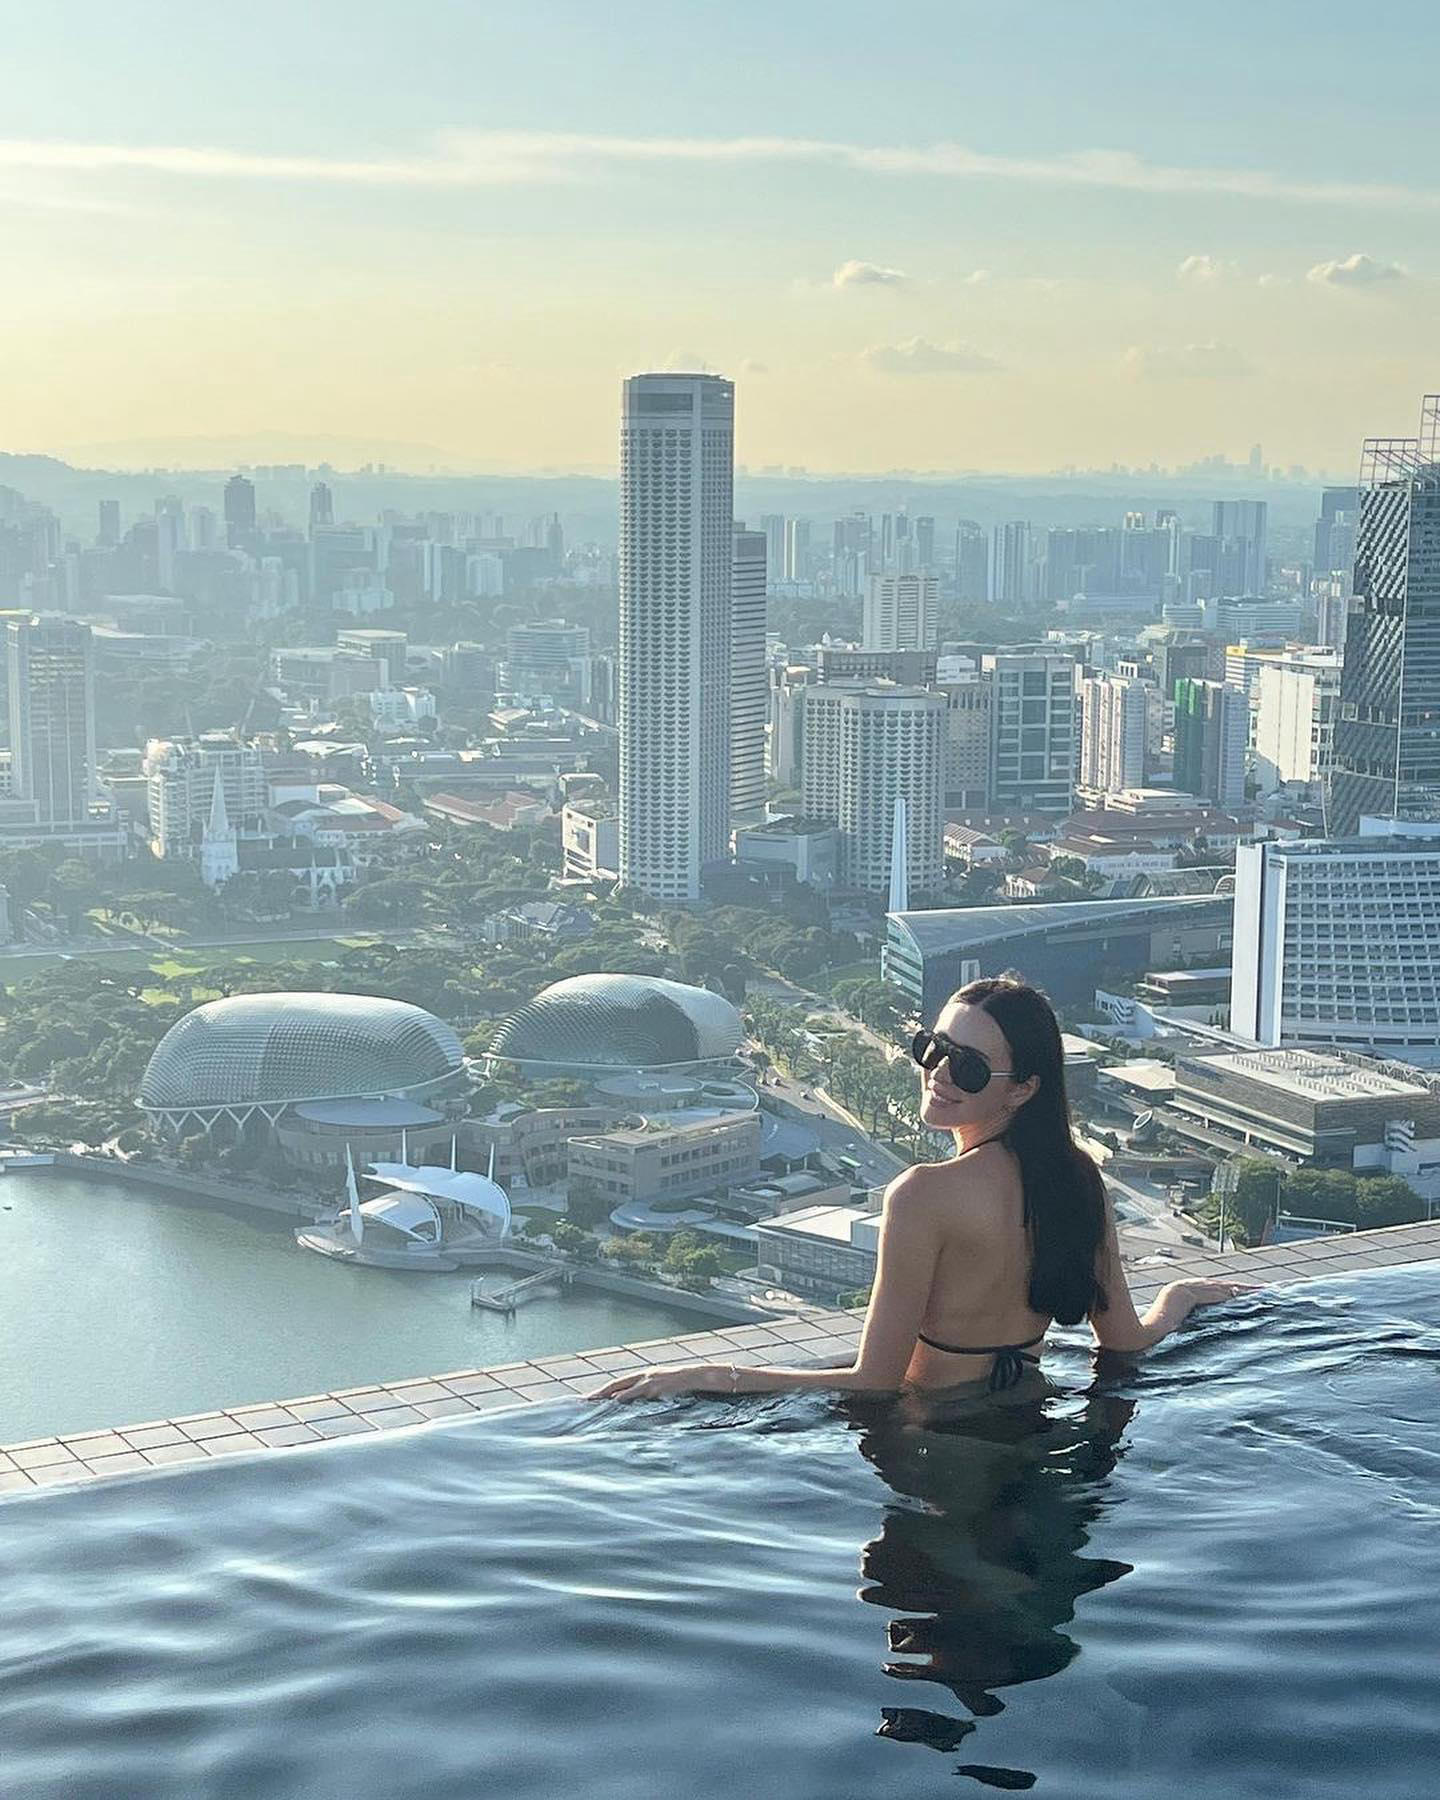 Marina Bay Sands - Cool off this afternoon with a dip in the infinity pool